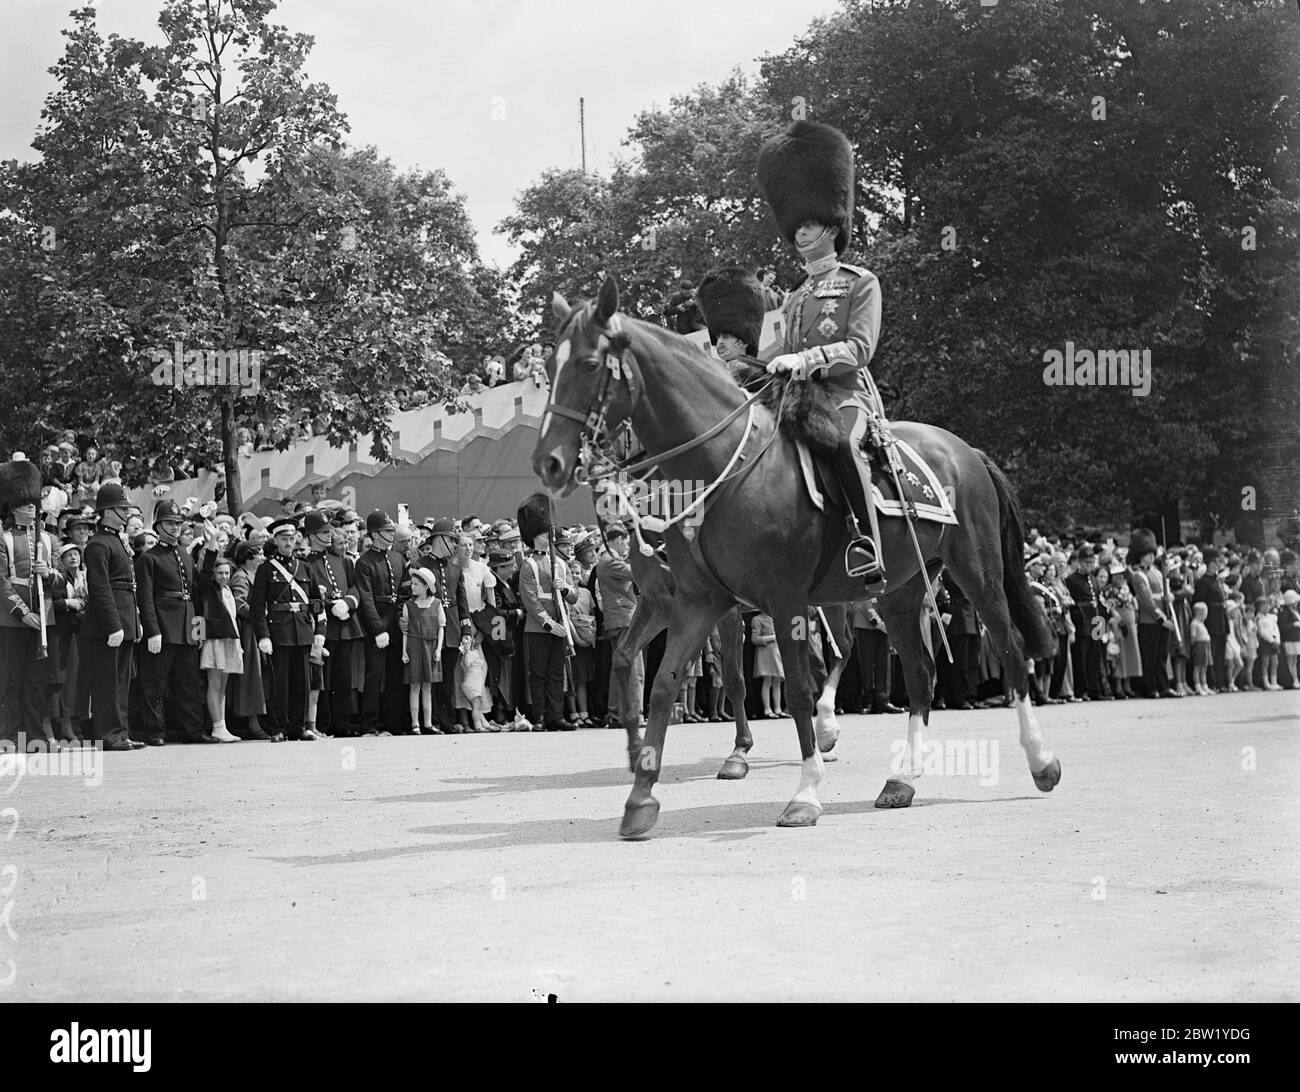 King rides in procession to Horse Guards for Trooping the Colour. For the first time since his succession the King rode in procession from Buckingham Palace to attend the ceremony of Trooping the Colour on the Horse Guards Parade. The King was accompanied by the Duke of Gloucester and Kent and Prince Arthur of Connaught. Photo shows: the King as he led the Guards back to Buckingham Palace. 9 June 1937 Stock Photo